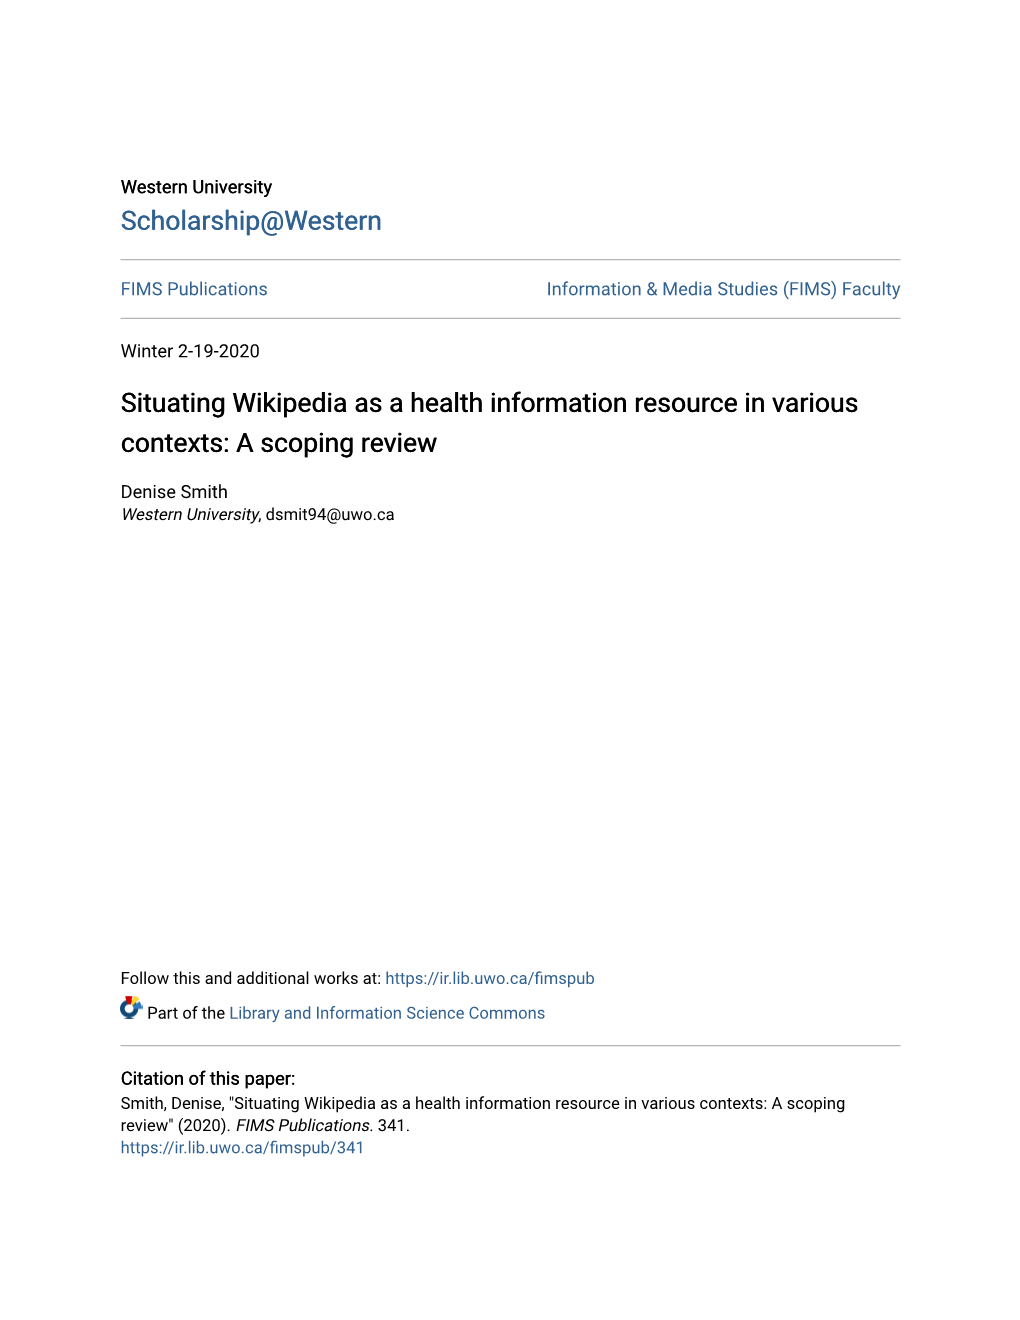 Situating Wikipedia As a Health Information Resource in Various Contexts: a Scoping Review